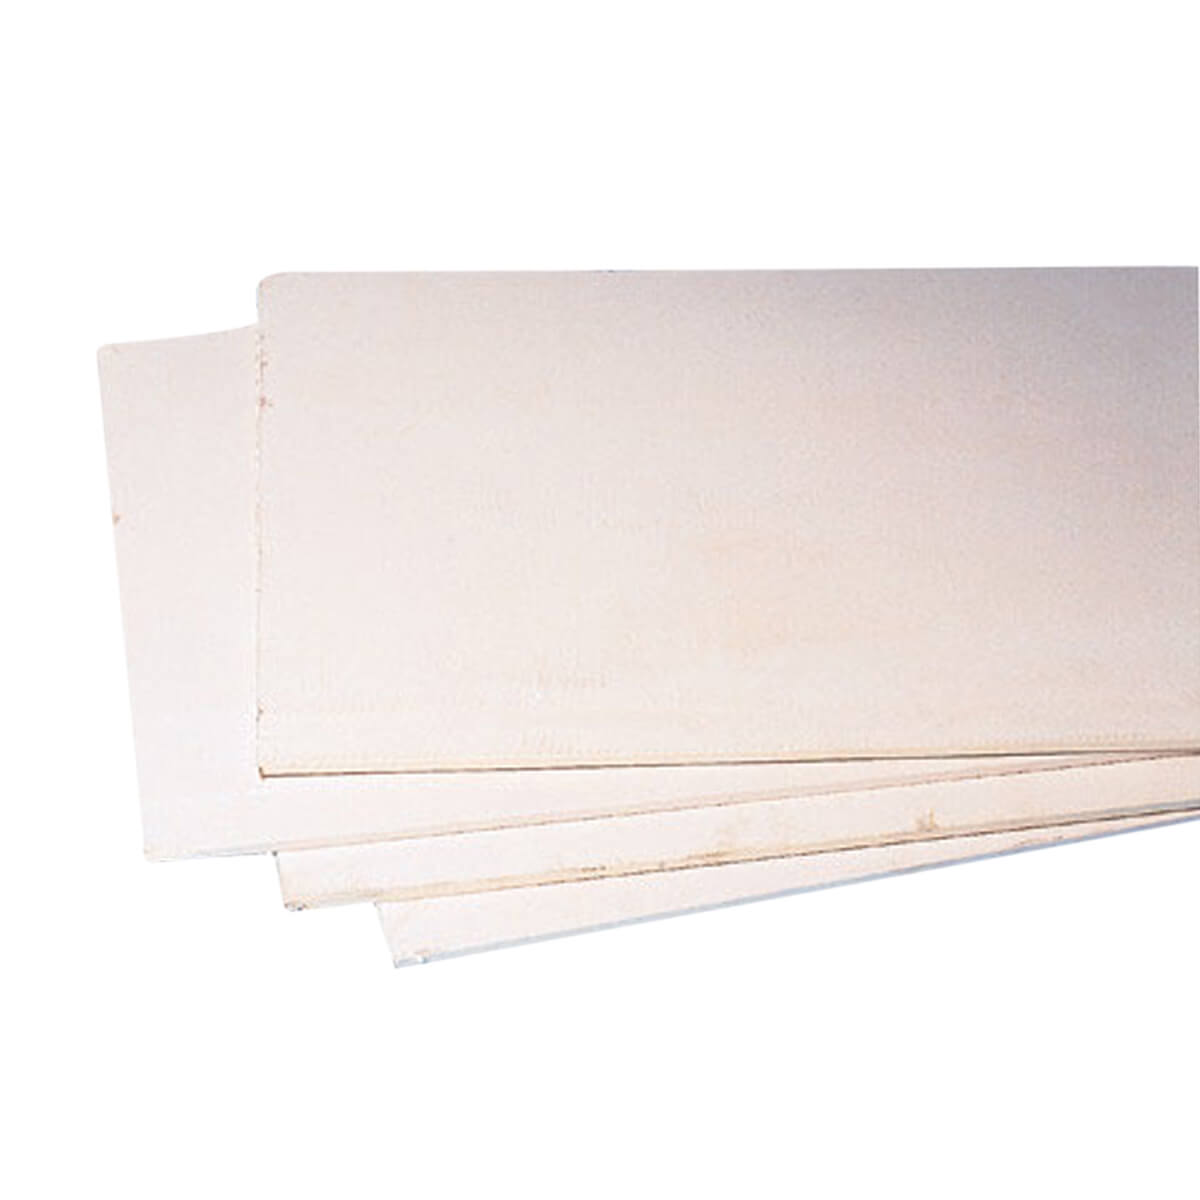 Standard Drywall - 4-ft x 10-ft 1/2-in sheet